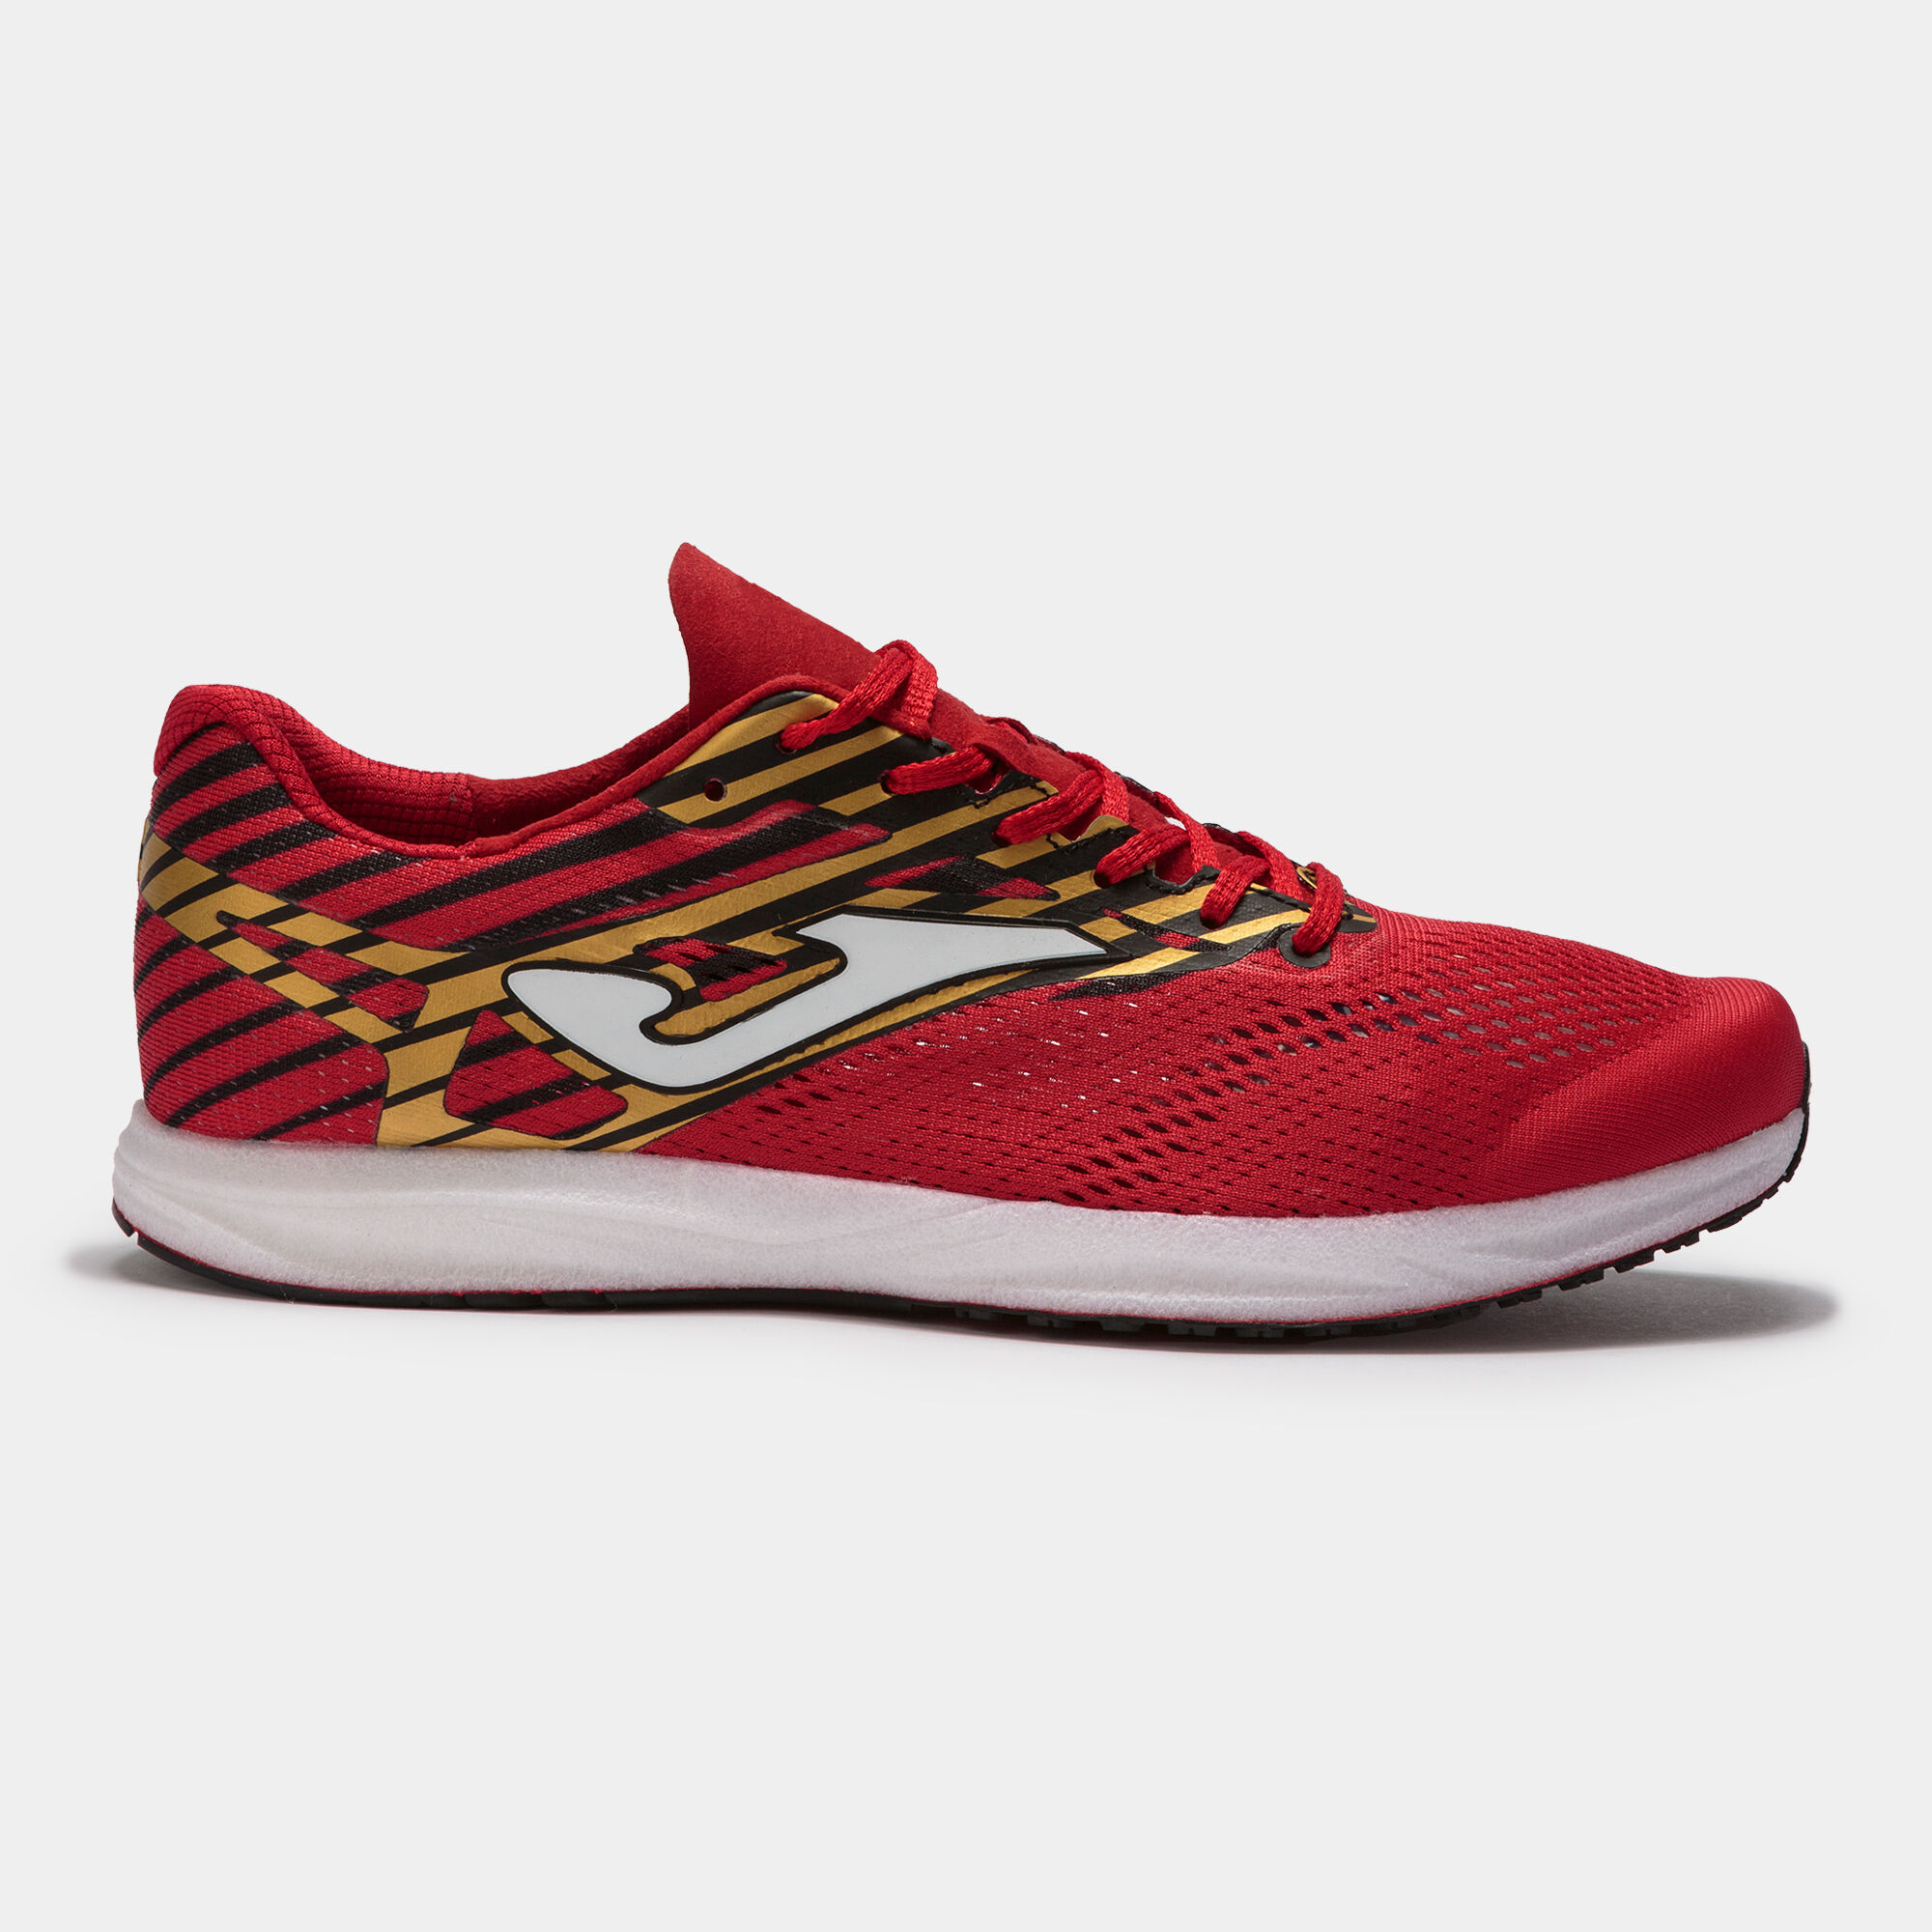 CHAUSSURES RUNNING R.5000 21 HOMME ROUGE